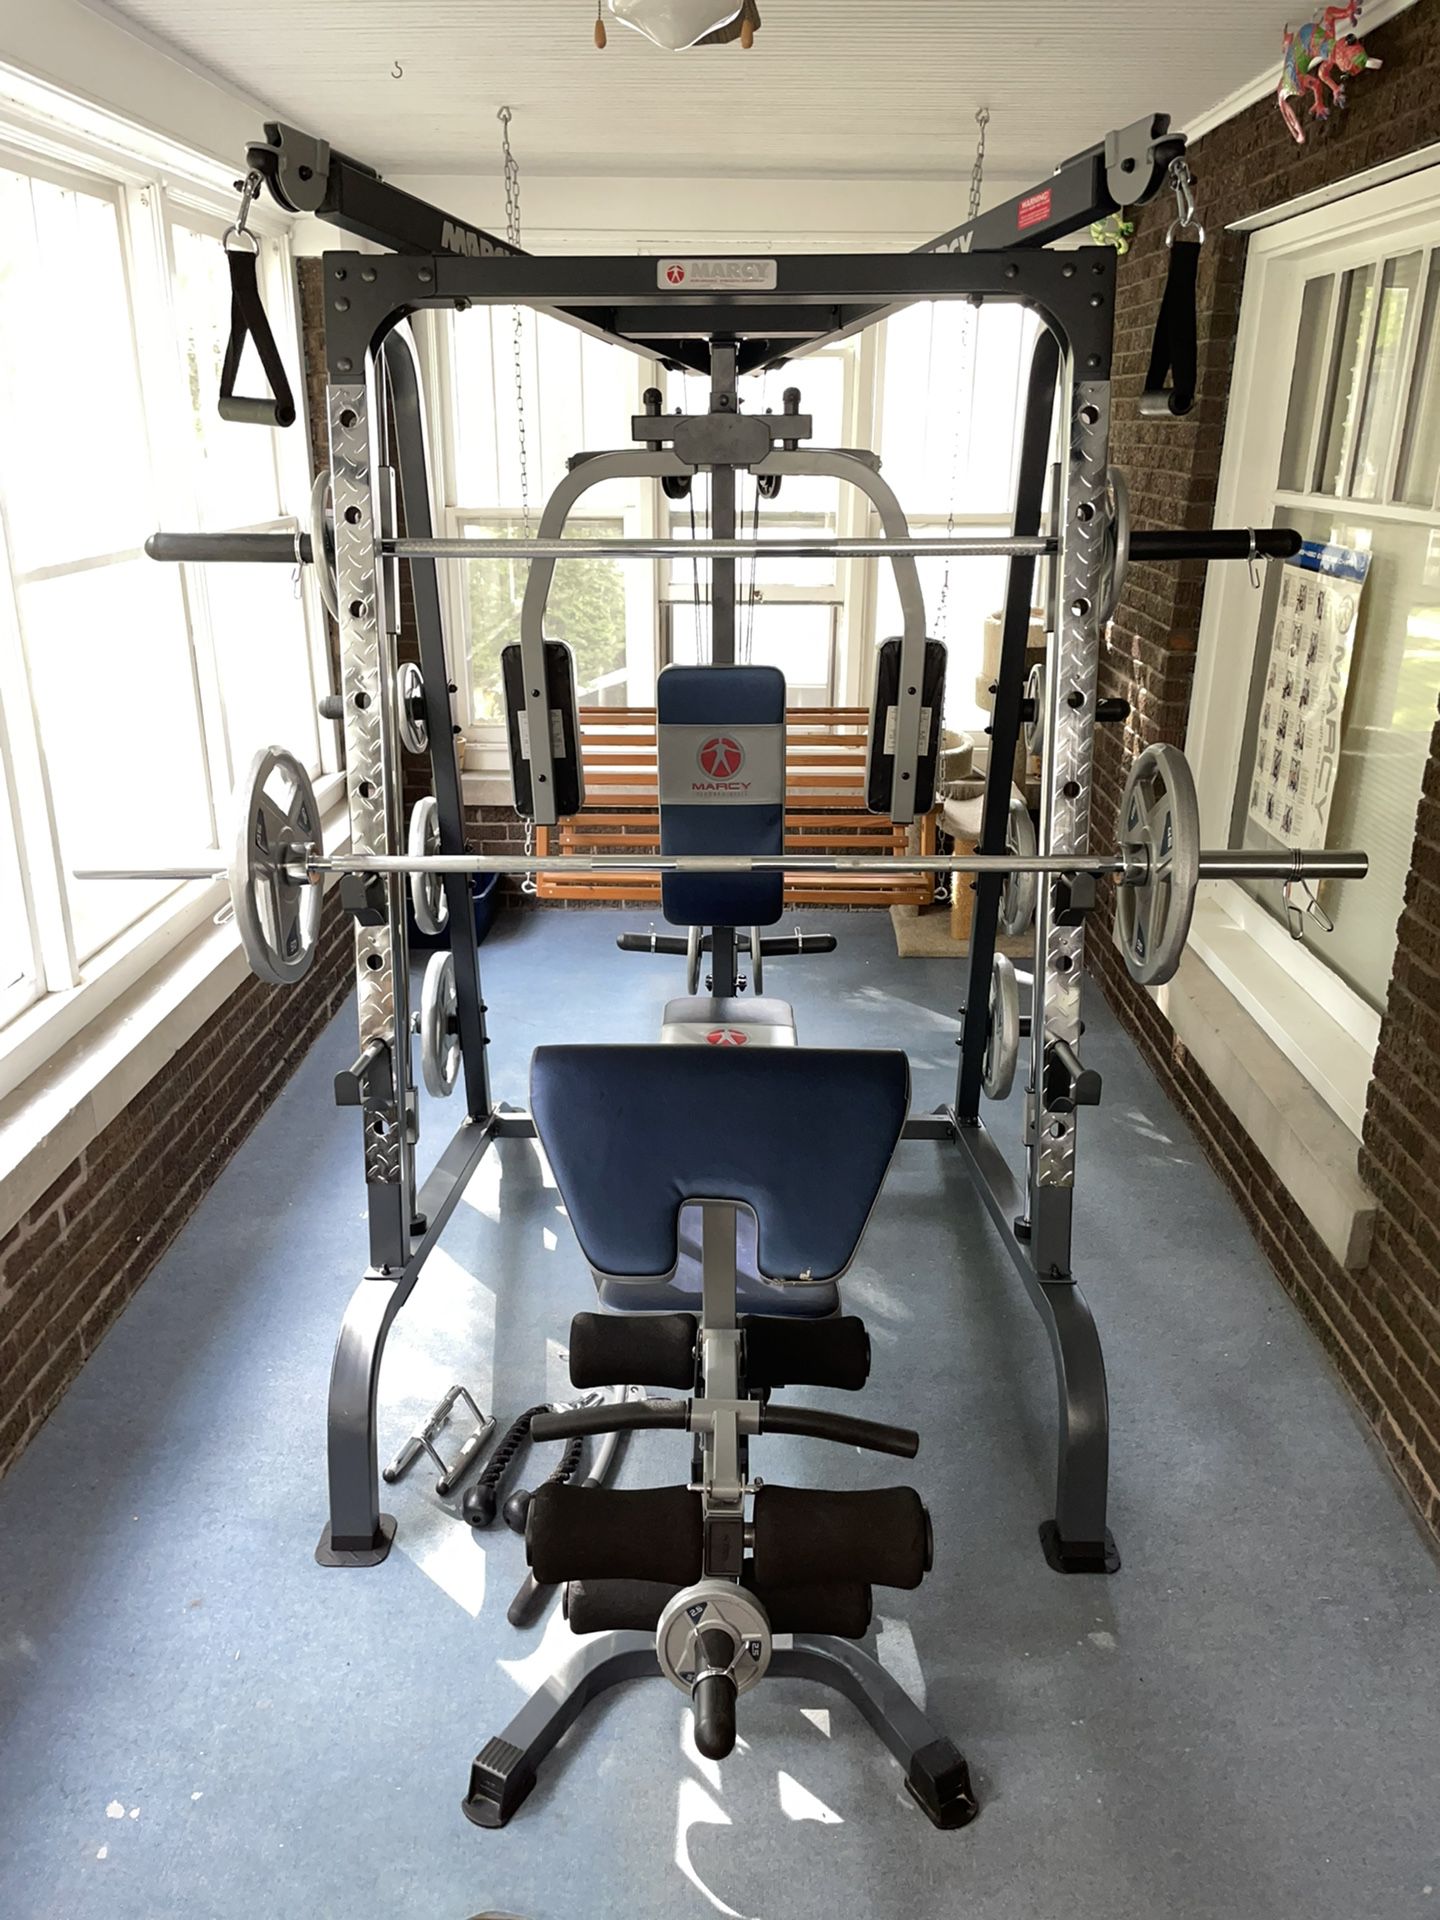 **PENDING PICKUP ** Marcy Smith Machine & Weights